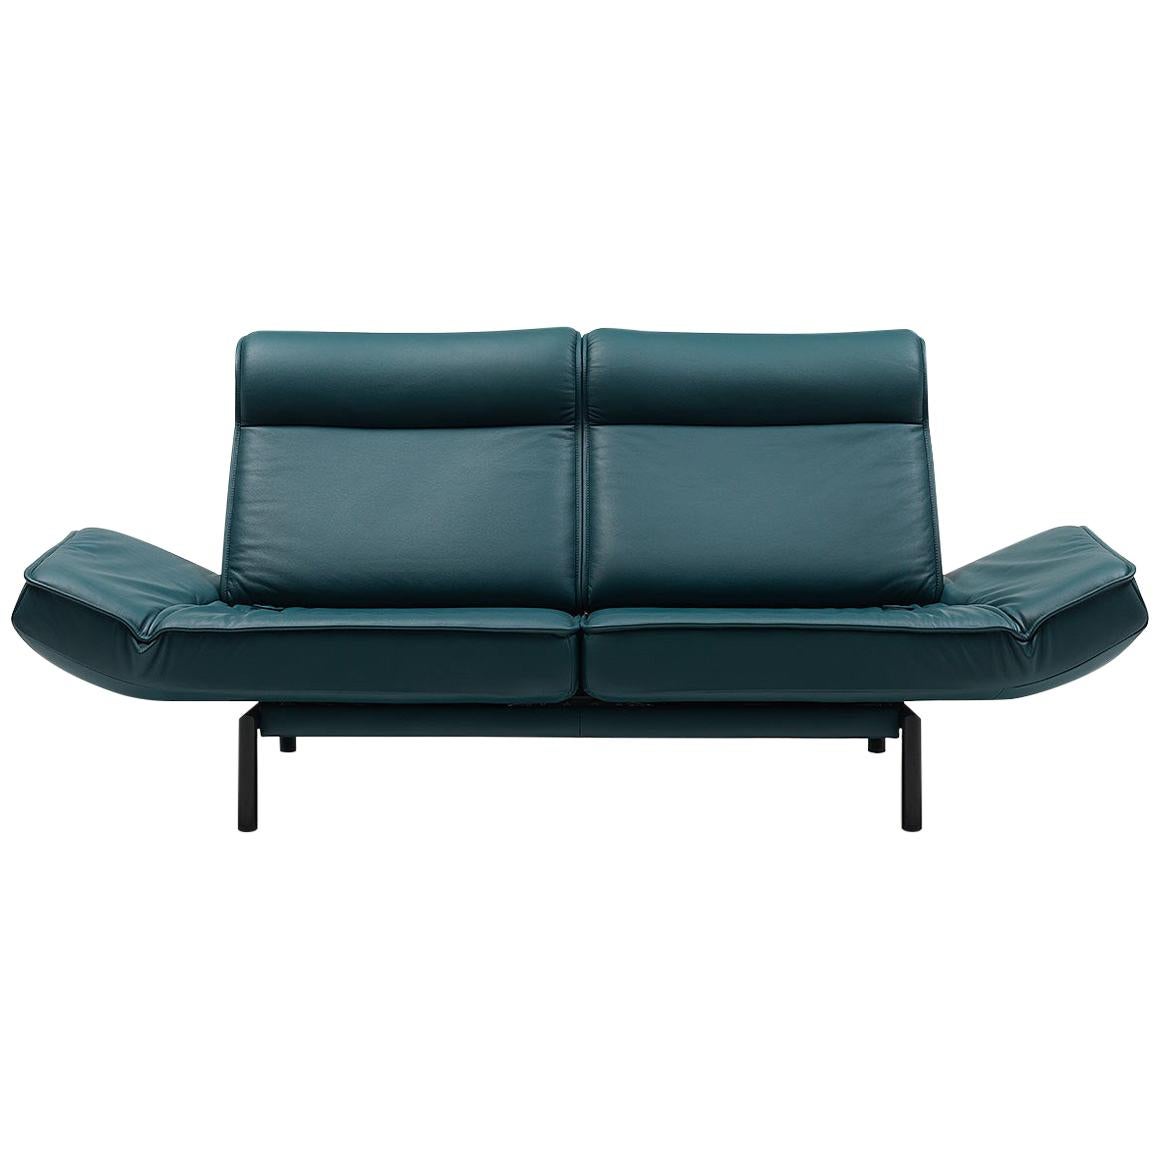 De Sede DS-450/02 Sofa in Petrol Upholstery by Thomas Althaus For Sale